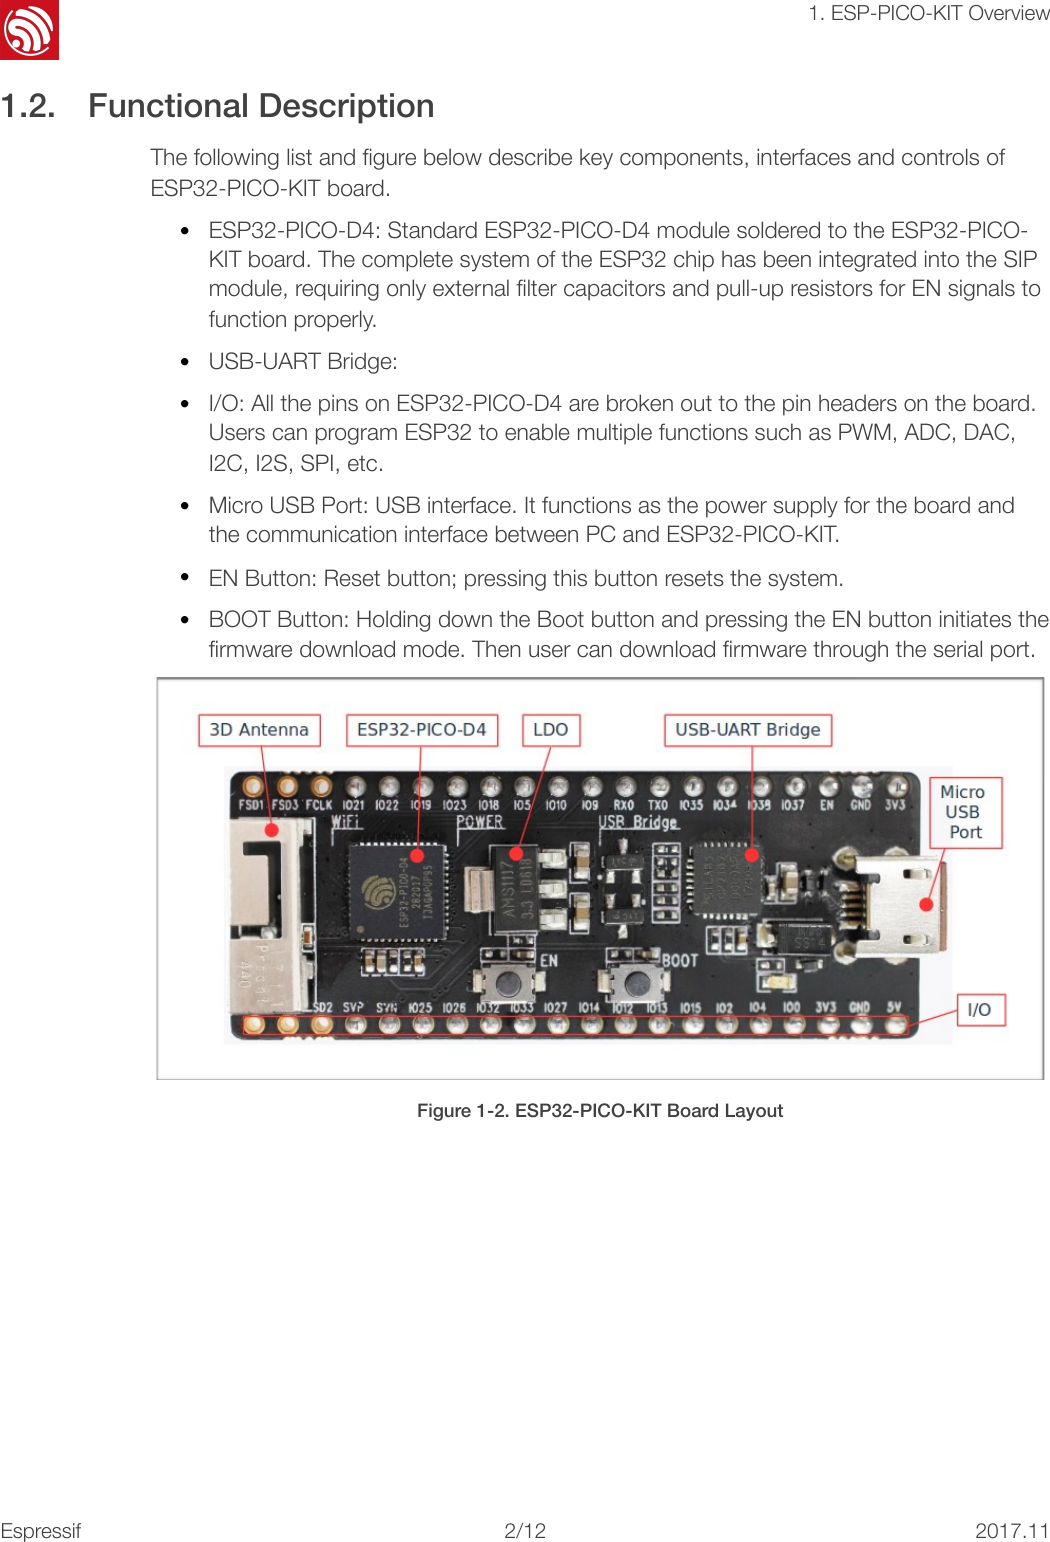 !1. ESP-PICO-KIT Overview1.2. Functional Description The following list and ﬁgure below describe key components, interfaces and controls of ESP32-PICO-KIT board. •ESP32-PICO-D4: Standard ESP32-PICO-D4 module soldered to the ESP32-PICO-KIT board. The complete system of the ESP32 chip has been integrated into the SIPmodule, requiring only external ﬁlter capacitors and pull-up resistors for EN signals tofunction properly.•USB-UART Bridge:•I/O: All the pins on ESP32-PICO-D4 are broken out to the pin headers on the board.Users can program ESP32 to enable multiple functions such as PWM, ADC, DAC,I2C, I2S, SPI, etc.•Micro USB Port: USB interface. It functions as the power supply for the board andthe communication interface between PC and ESP32-PICO-KIT.•EN Button: Reset button; pressing this button resets the system.•BOOT Button: Holding down the Boot button and pressing the EN button initiates theﬁrmware download mode. Then user can download ﬁrmware through the serial port.!Figure 1-2. ESP32-PICO-KIT Board Layout Espressif!/1222017.11